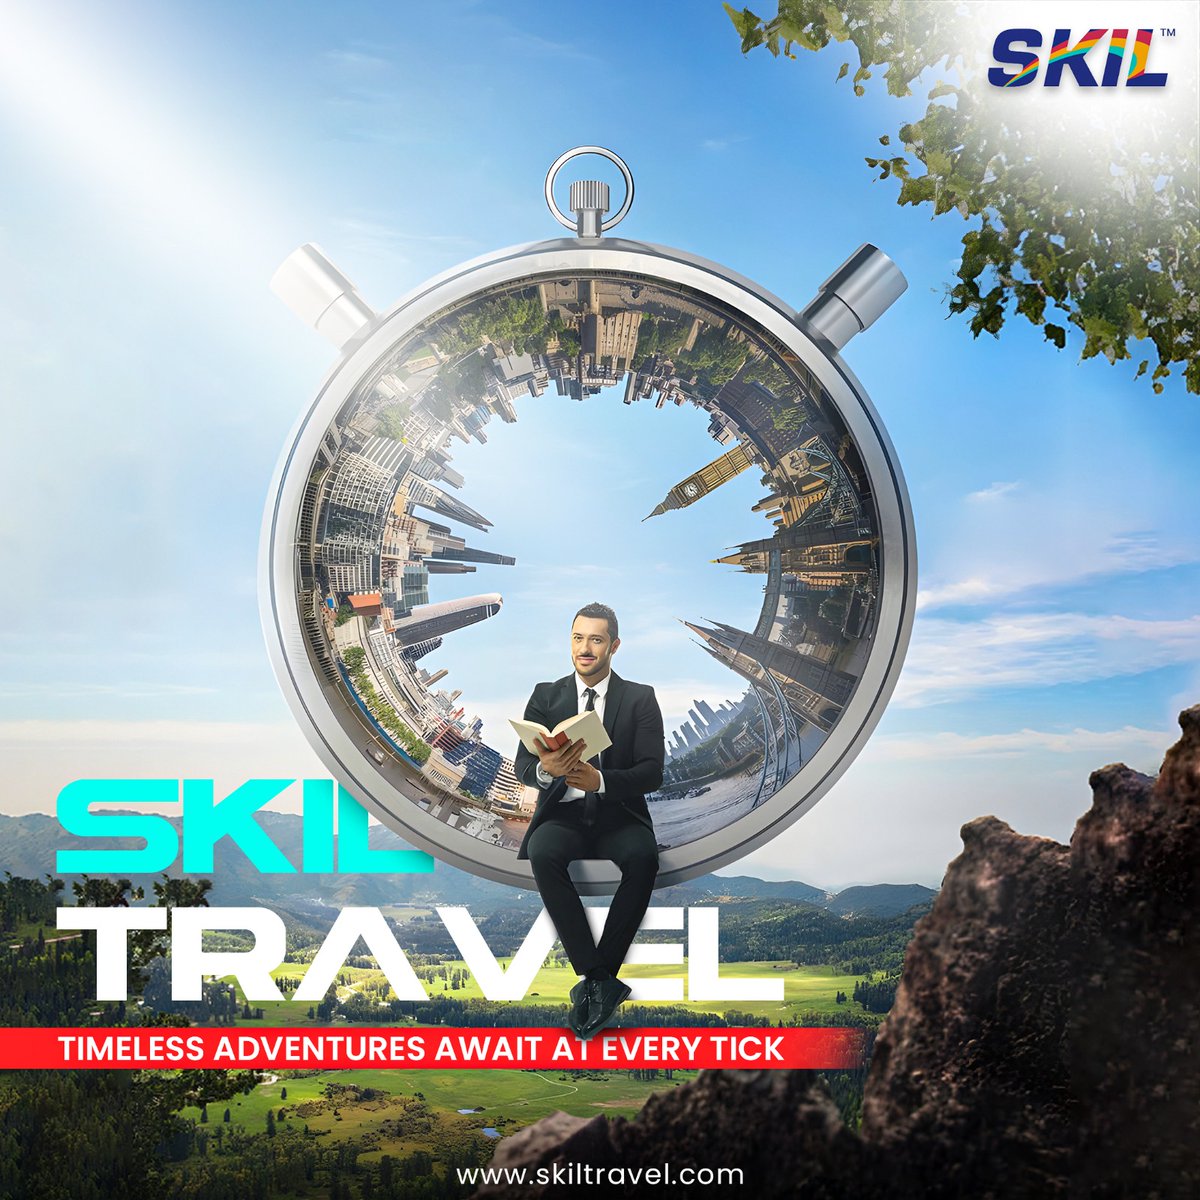 𝐒𝐊𝐈𝐋 𝐓𝐫𝐚𝐯𝐞𝐥 curates exceptional corporate experiences that spark connection, growth, and inspiration. We believe every moment holds the potential for timeless adventure. 🤝🌏 #SKILTravel #SKIL #corporatetravel #businesstravel #businesstrip #incentivetravel #workcation